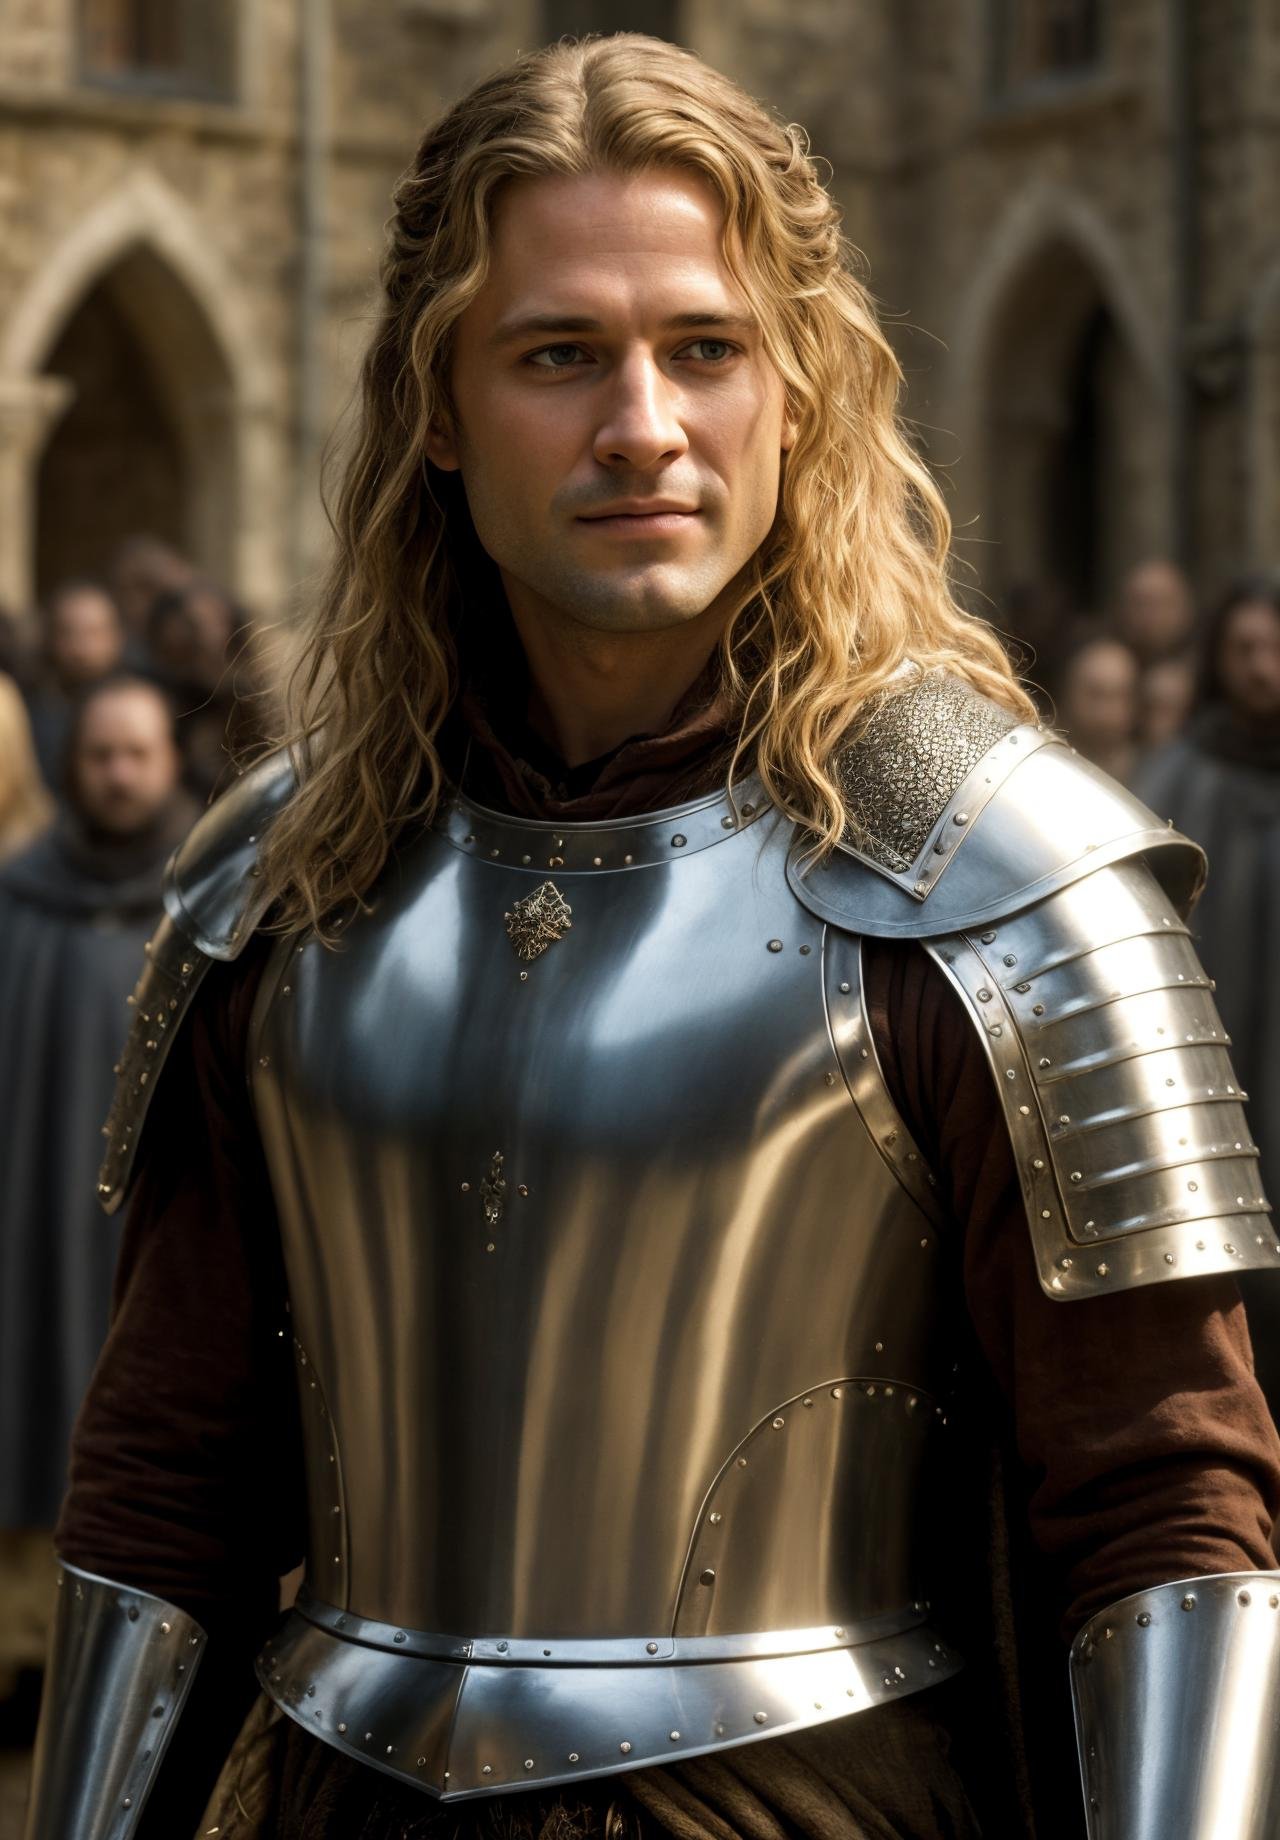 analog, raw, amateur photograph, majestic intricately detailed glamor photograph, 1man, (body portrait:1.2), a pristine handsome arrogant paladin, (intricately detailed filigreed polished steel full plate armor:1.4), stubble,( long blonde hair:1.2), detailed eyes, (smug smile:1.3),  (busy castle courtyard, medieval setting, crowd of onlookers, peasantry:1.6), (sun set, warm colors:1.2), somber, (backlit:1.3), reflections, highres, depth of field,, dynamic angle, professional, soft lighting, smooth, roughness, real life, cinematic film still from (the lord of the rings:1.1)|(cannibal holocaust:0.1)|game of thrones:0.3)|(vikings:0.3)